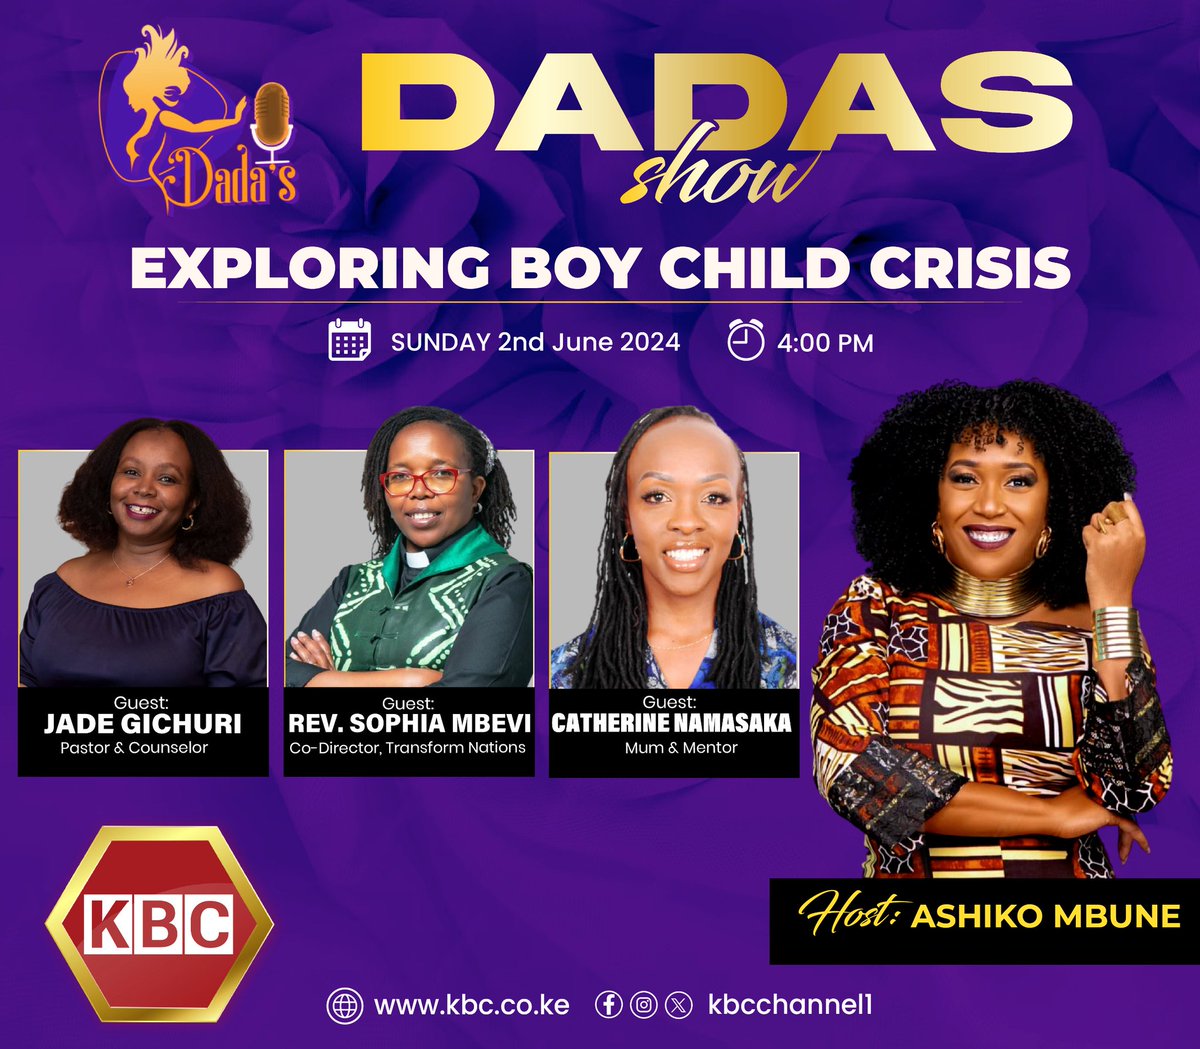 Every boy child deserves a safe space to grow, learn and flourish! This week's episode is centred on 'boy child crisis'. Join the conversation Sunday at 4PM. #KBCniYetu ^EM